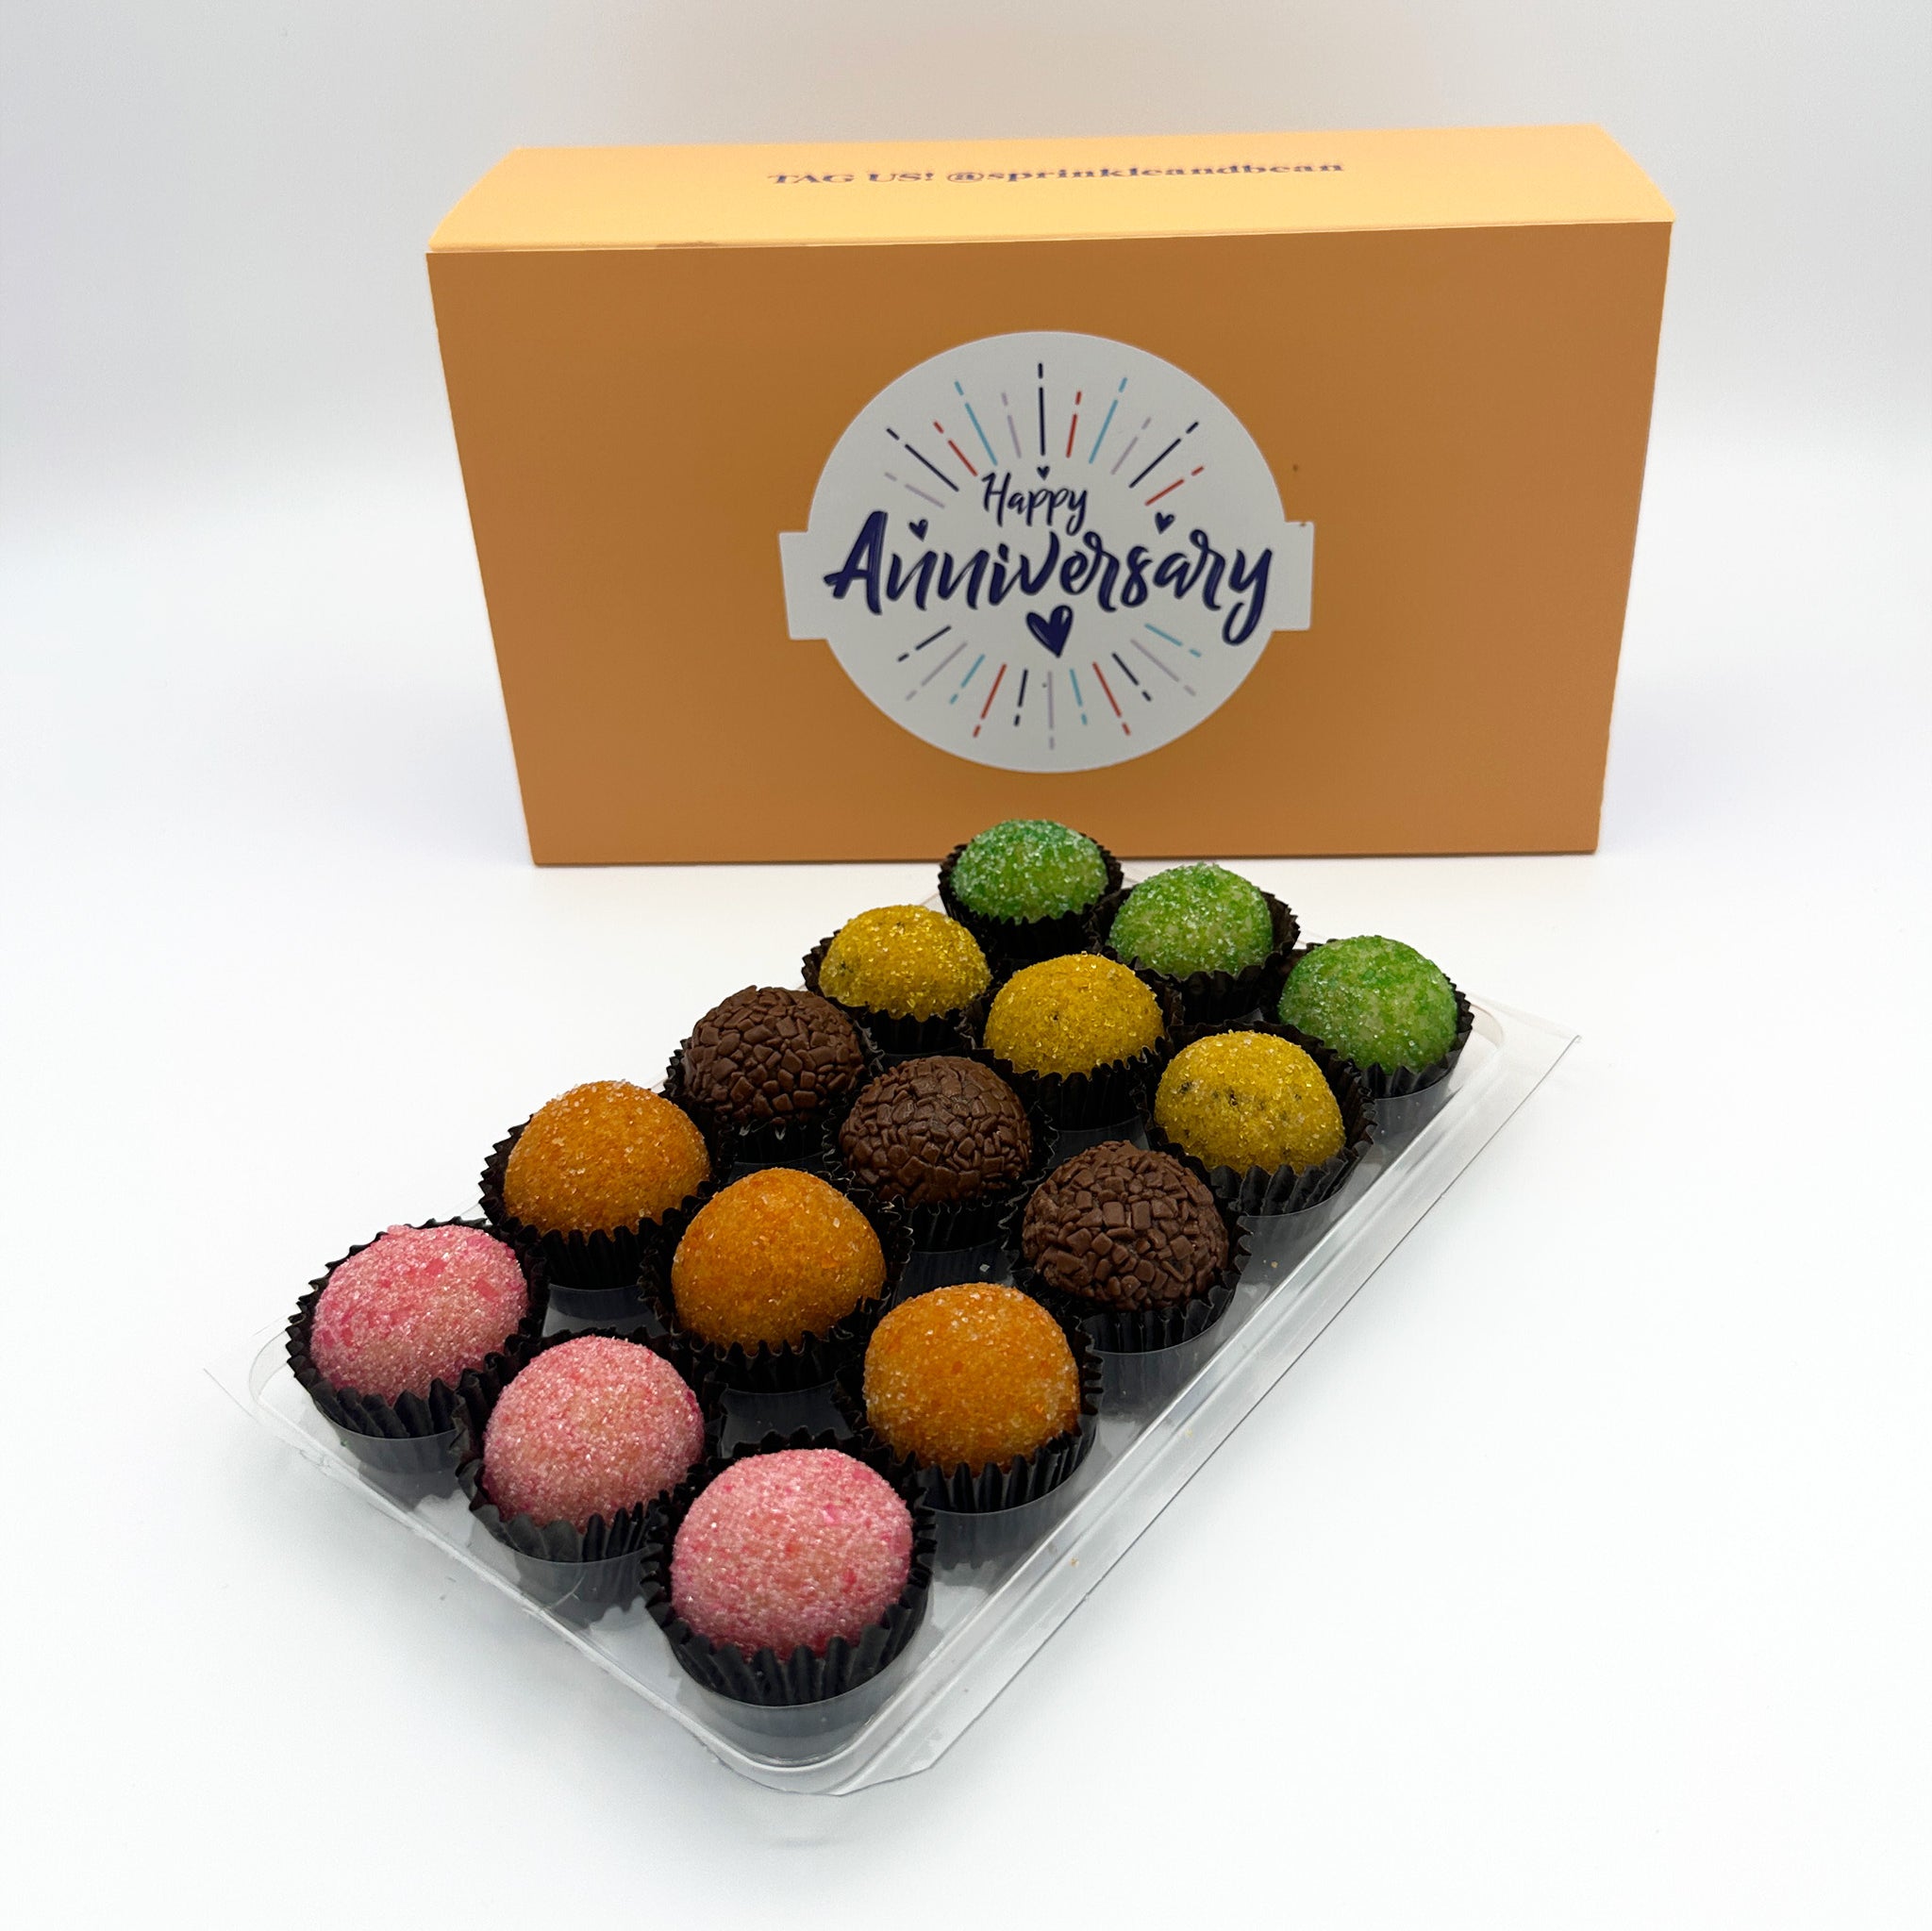 A sweet decision for an anniversary gift, a box of Anniversary Fruits Brigadeiros in a plastic container.